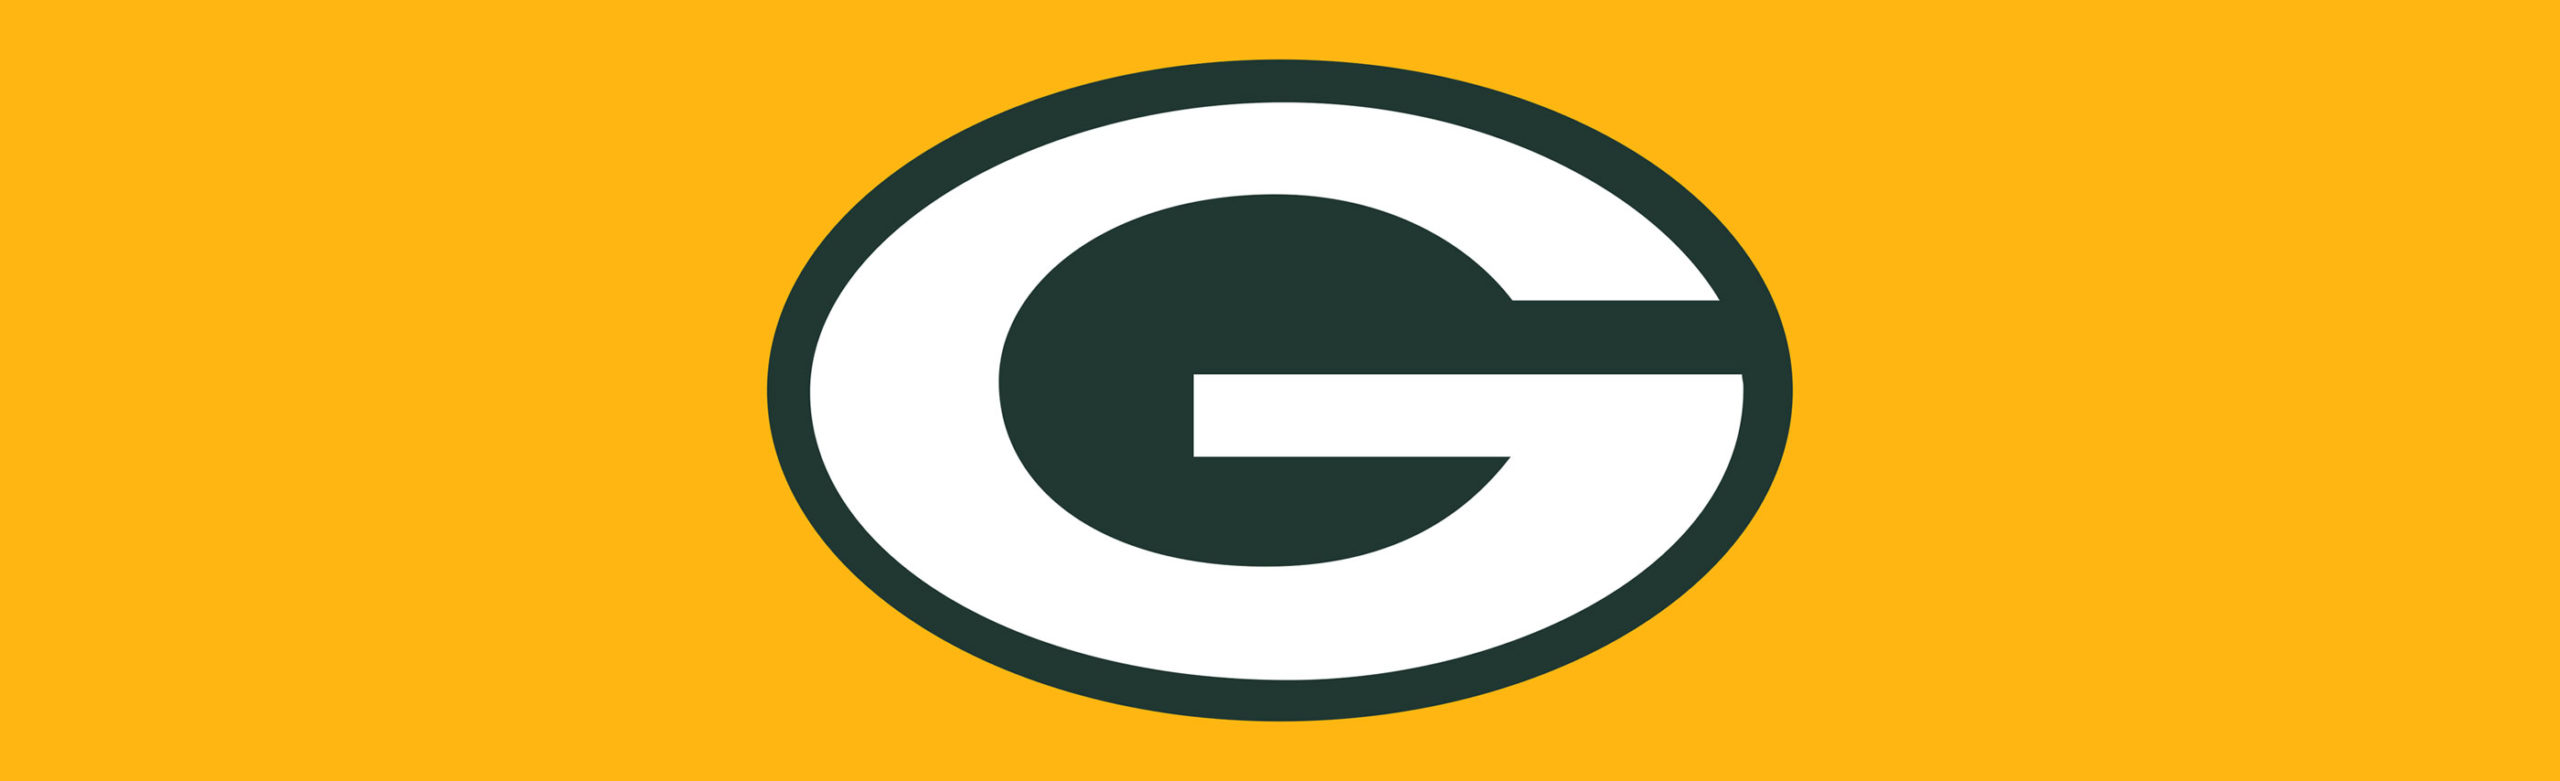 Cheeseheads Unite: Green Bay Packers Games to be Screened at Top Hat and The Wilma Image